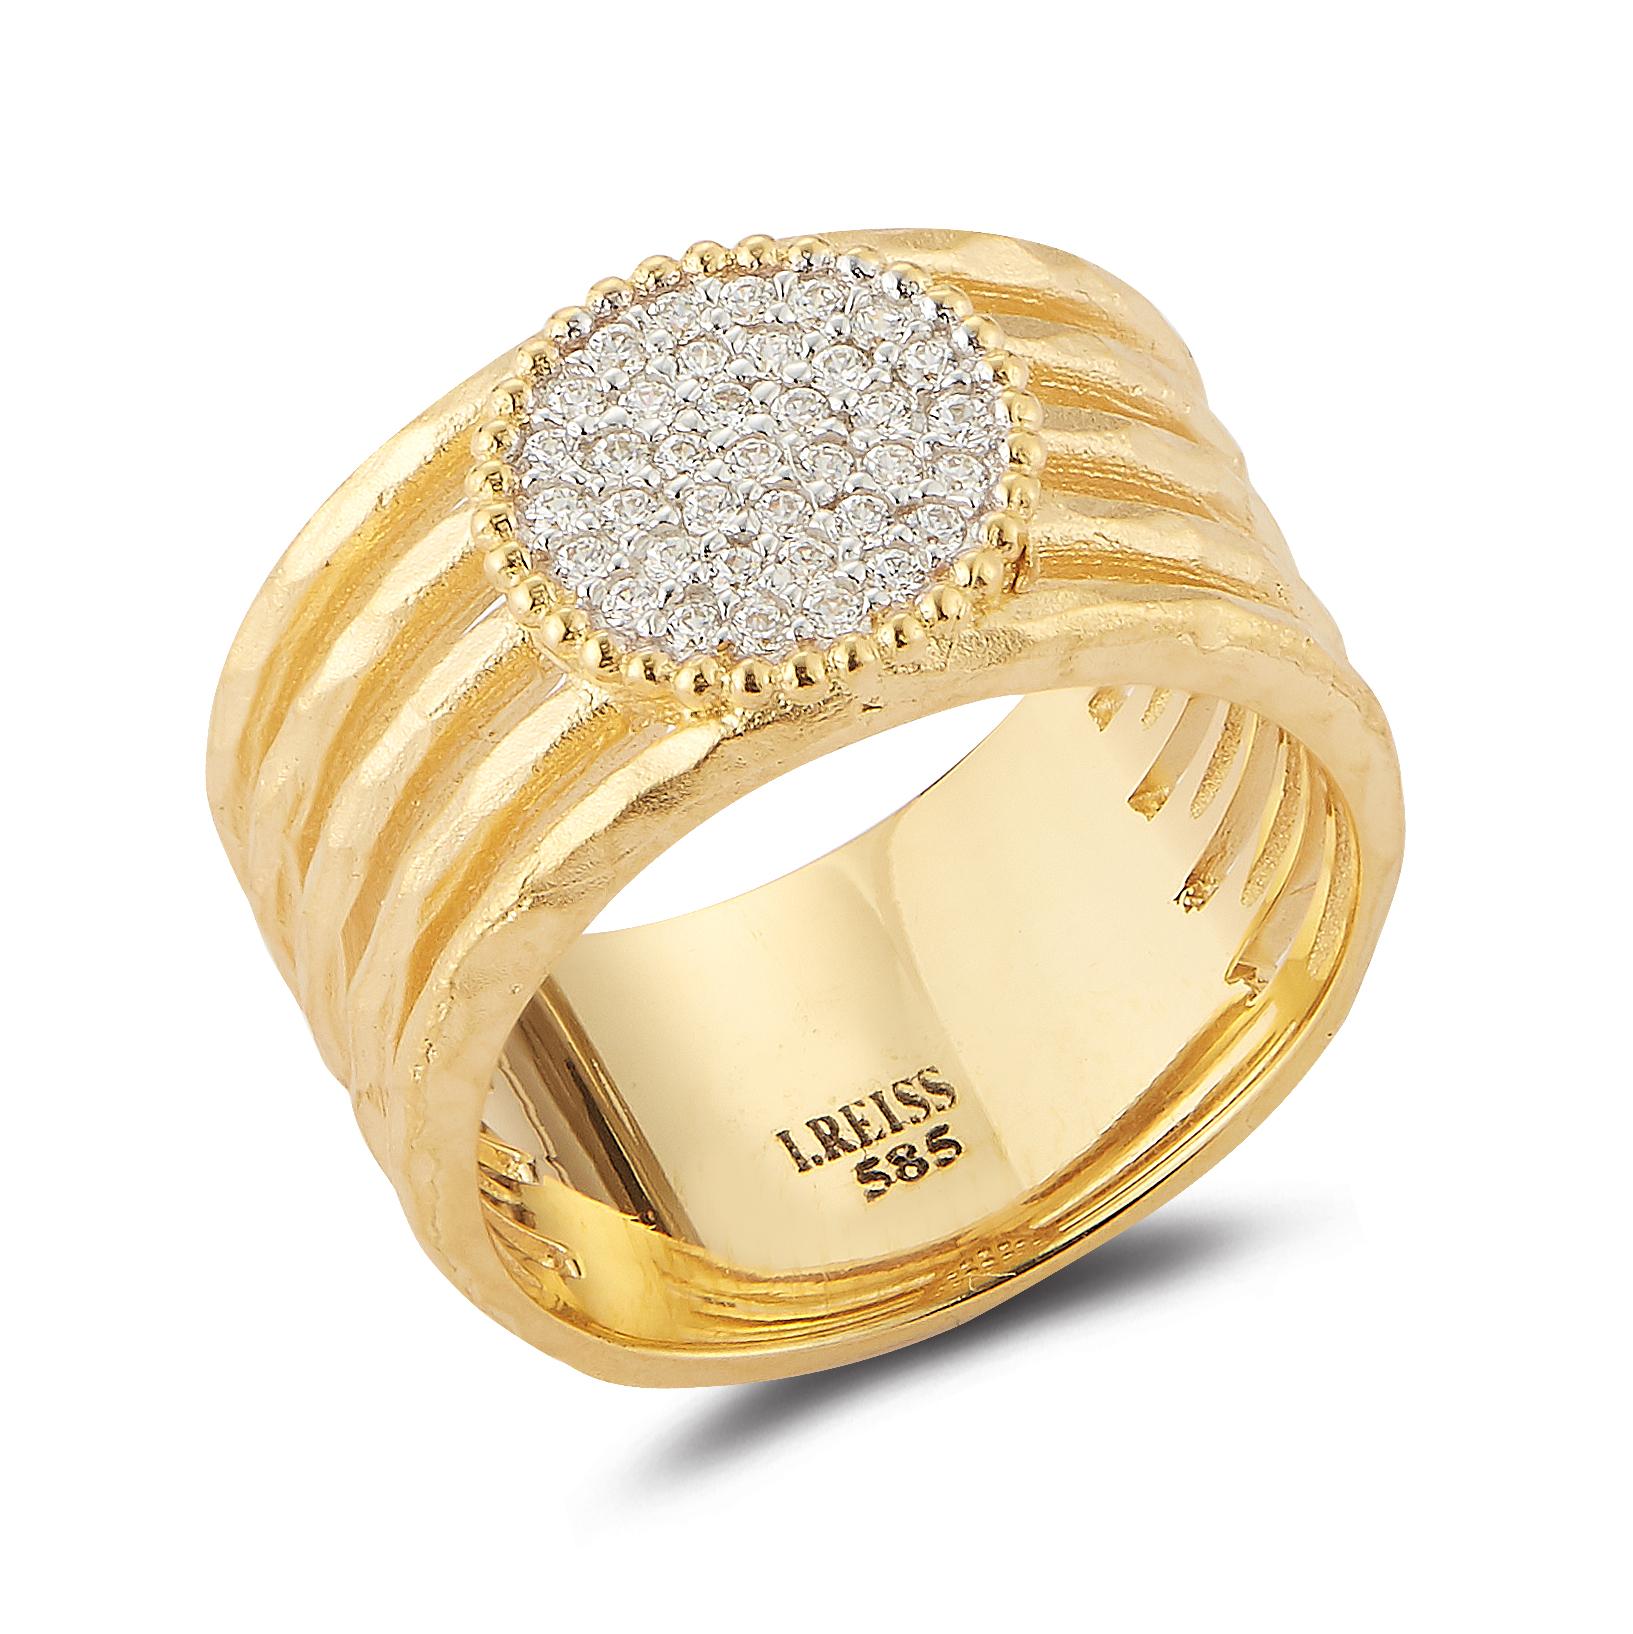 14 Karat Yellow Gold Hand-Crafted Matte and Hammer-Finished Cut-Out Strand Ring, Centered with 0.22 Carats of a Pave Set Diamond Circle.
 
